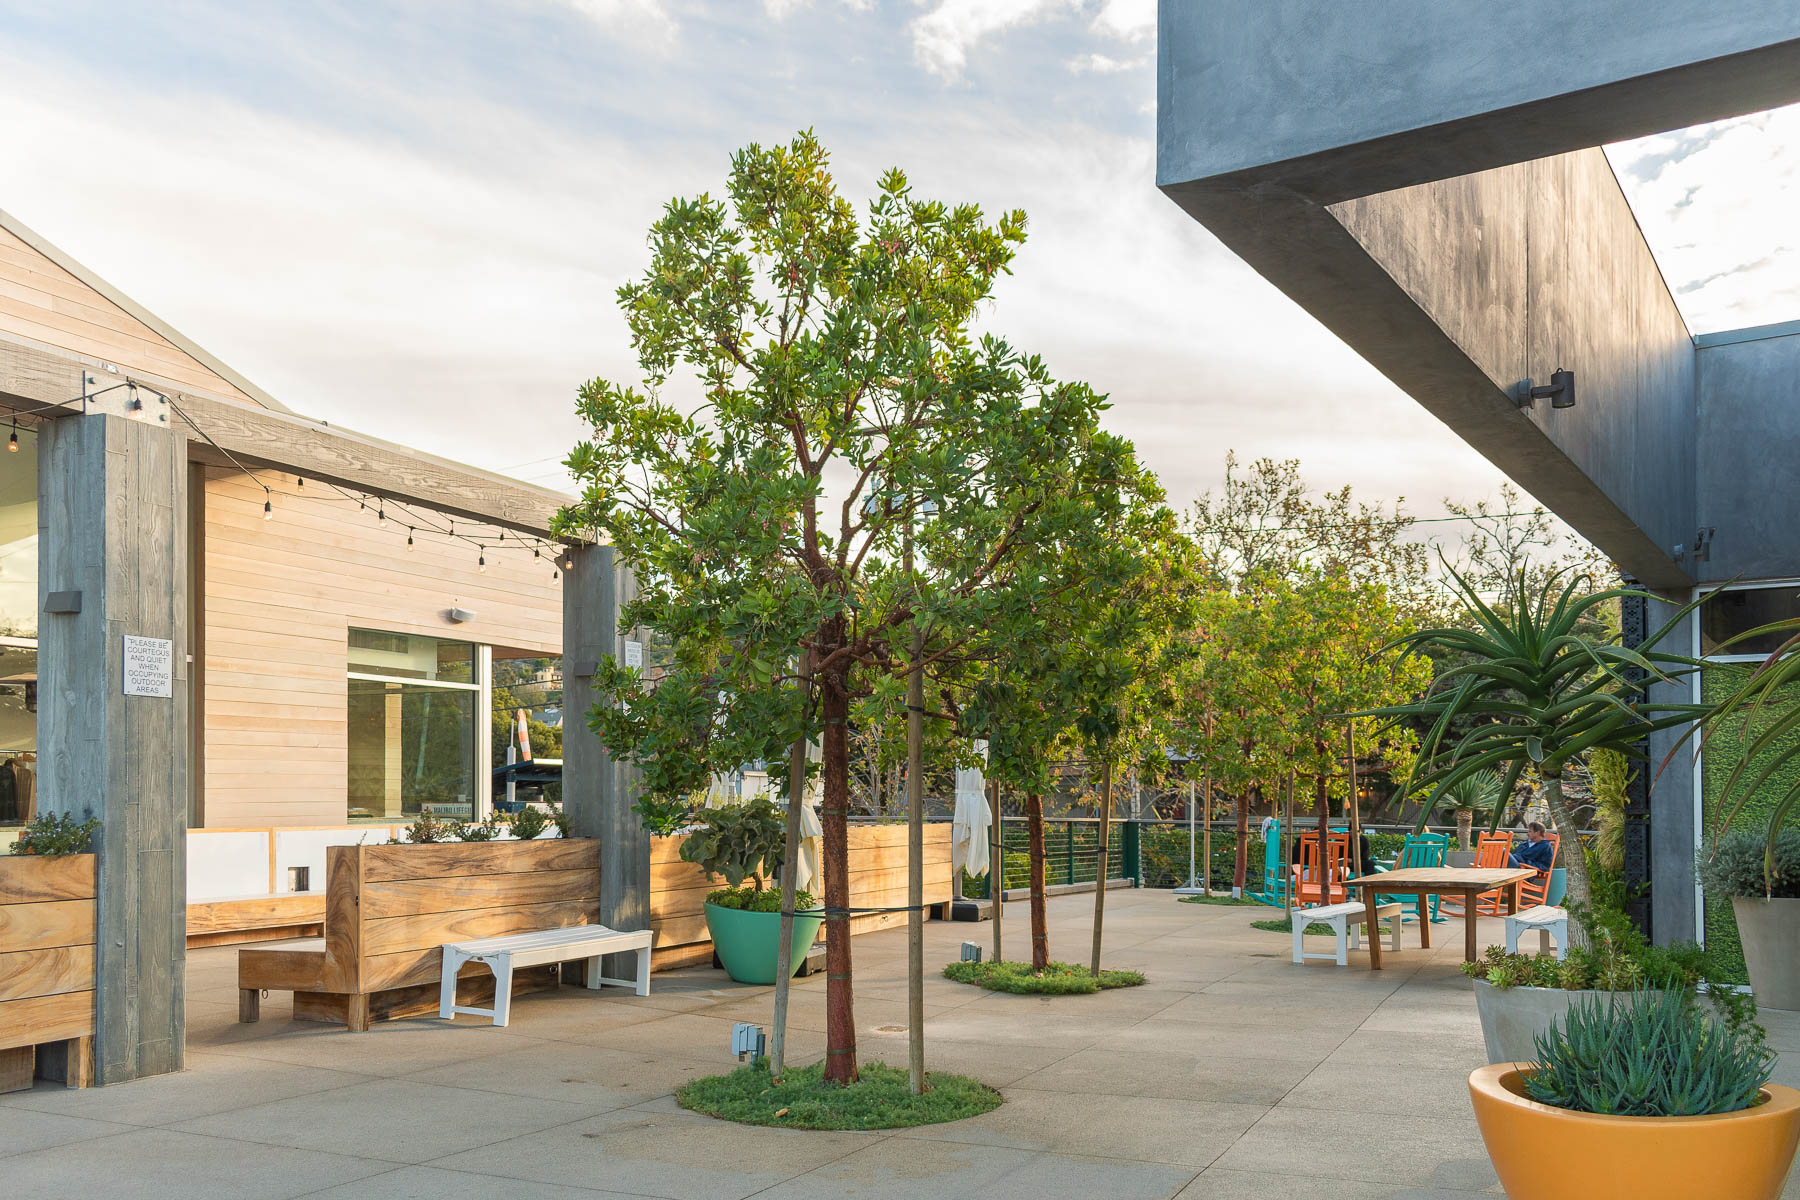 Retail space - trees and sitting area